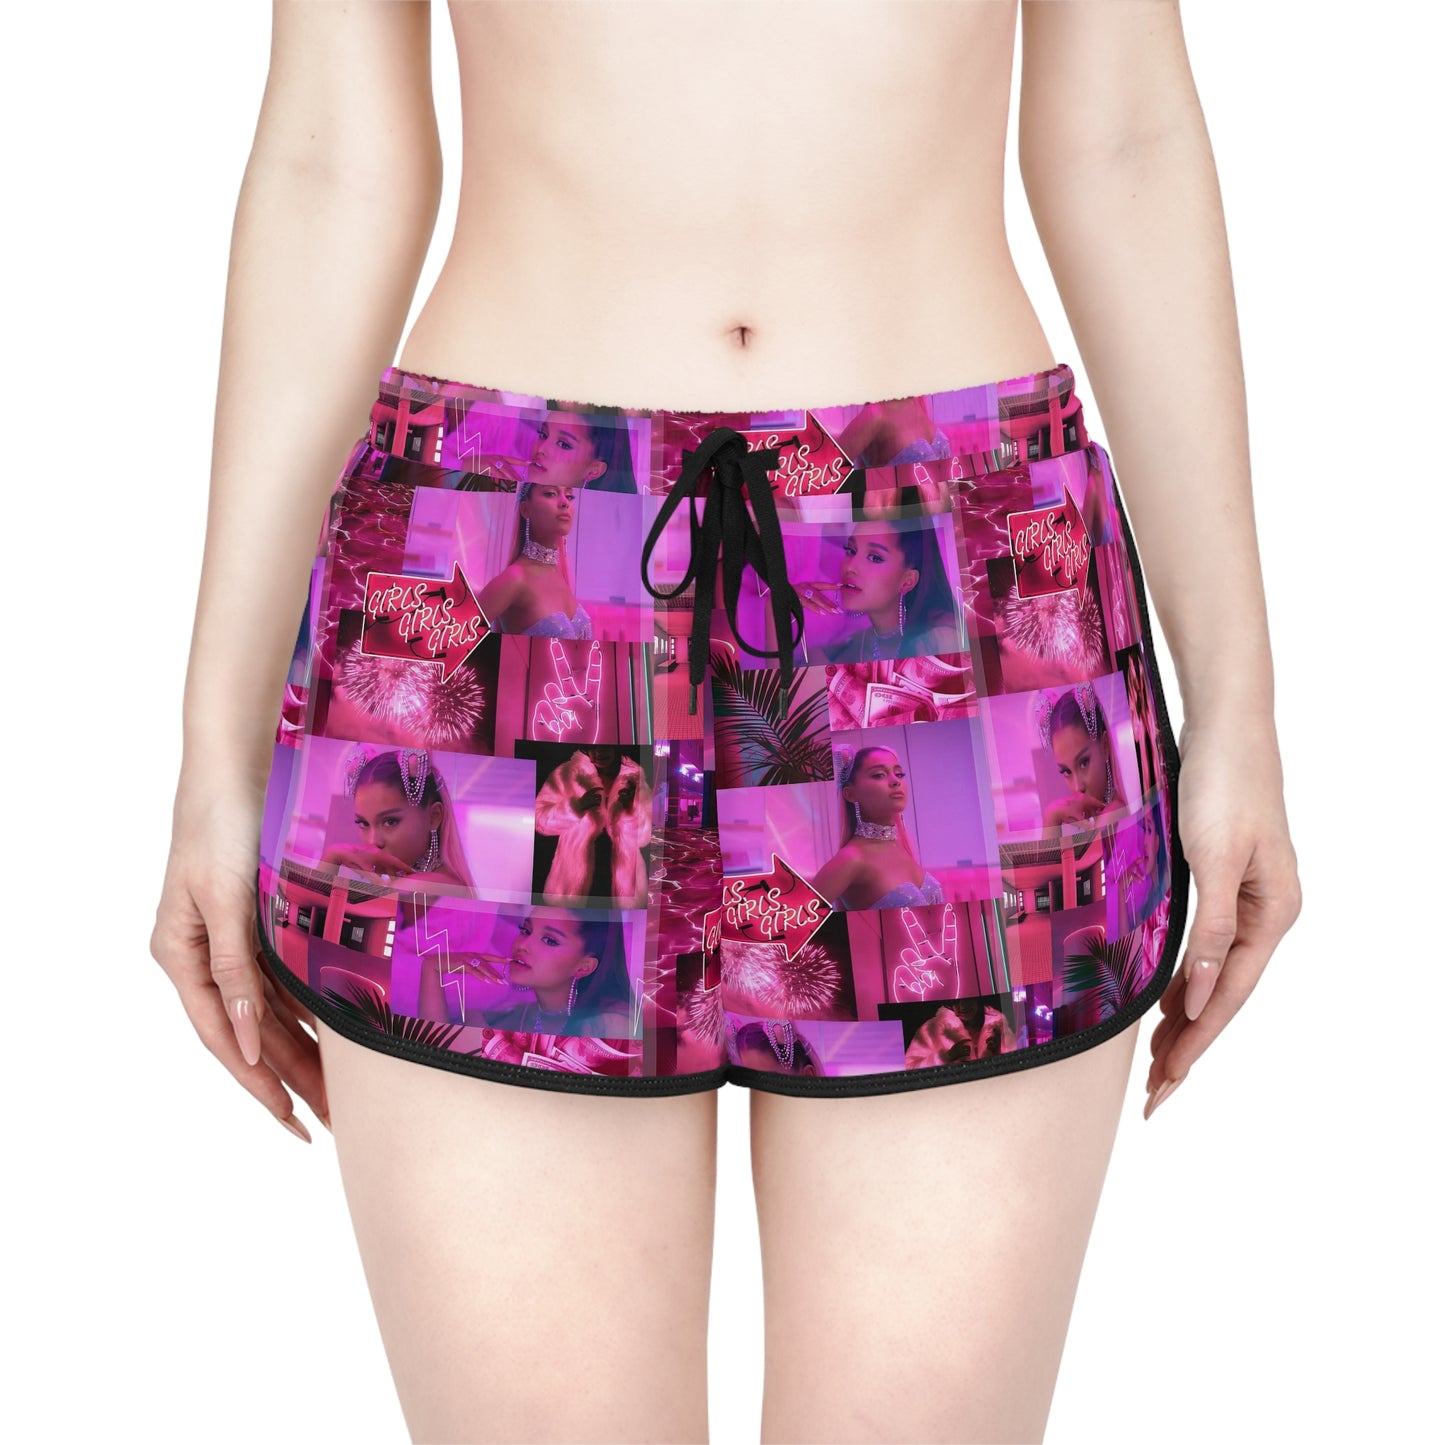 Ariana Grande 7 Rings Collage Women's Relaxed Shorts